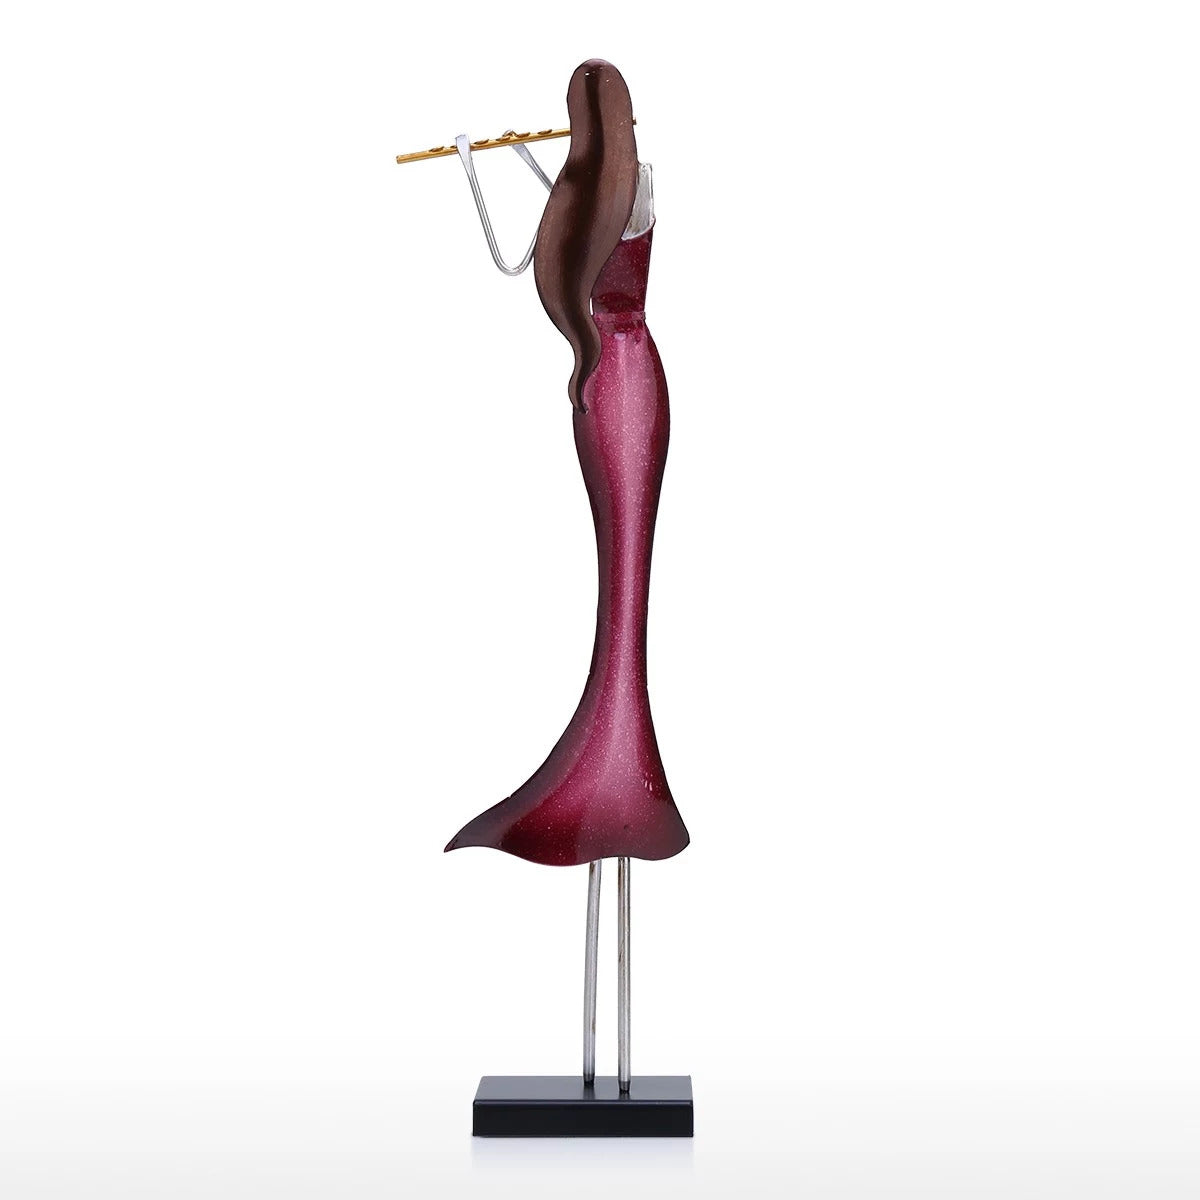 Unique Gifts For Flute Players and Flutist with Decorative Ornament Statue